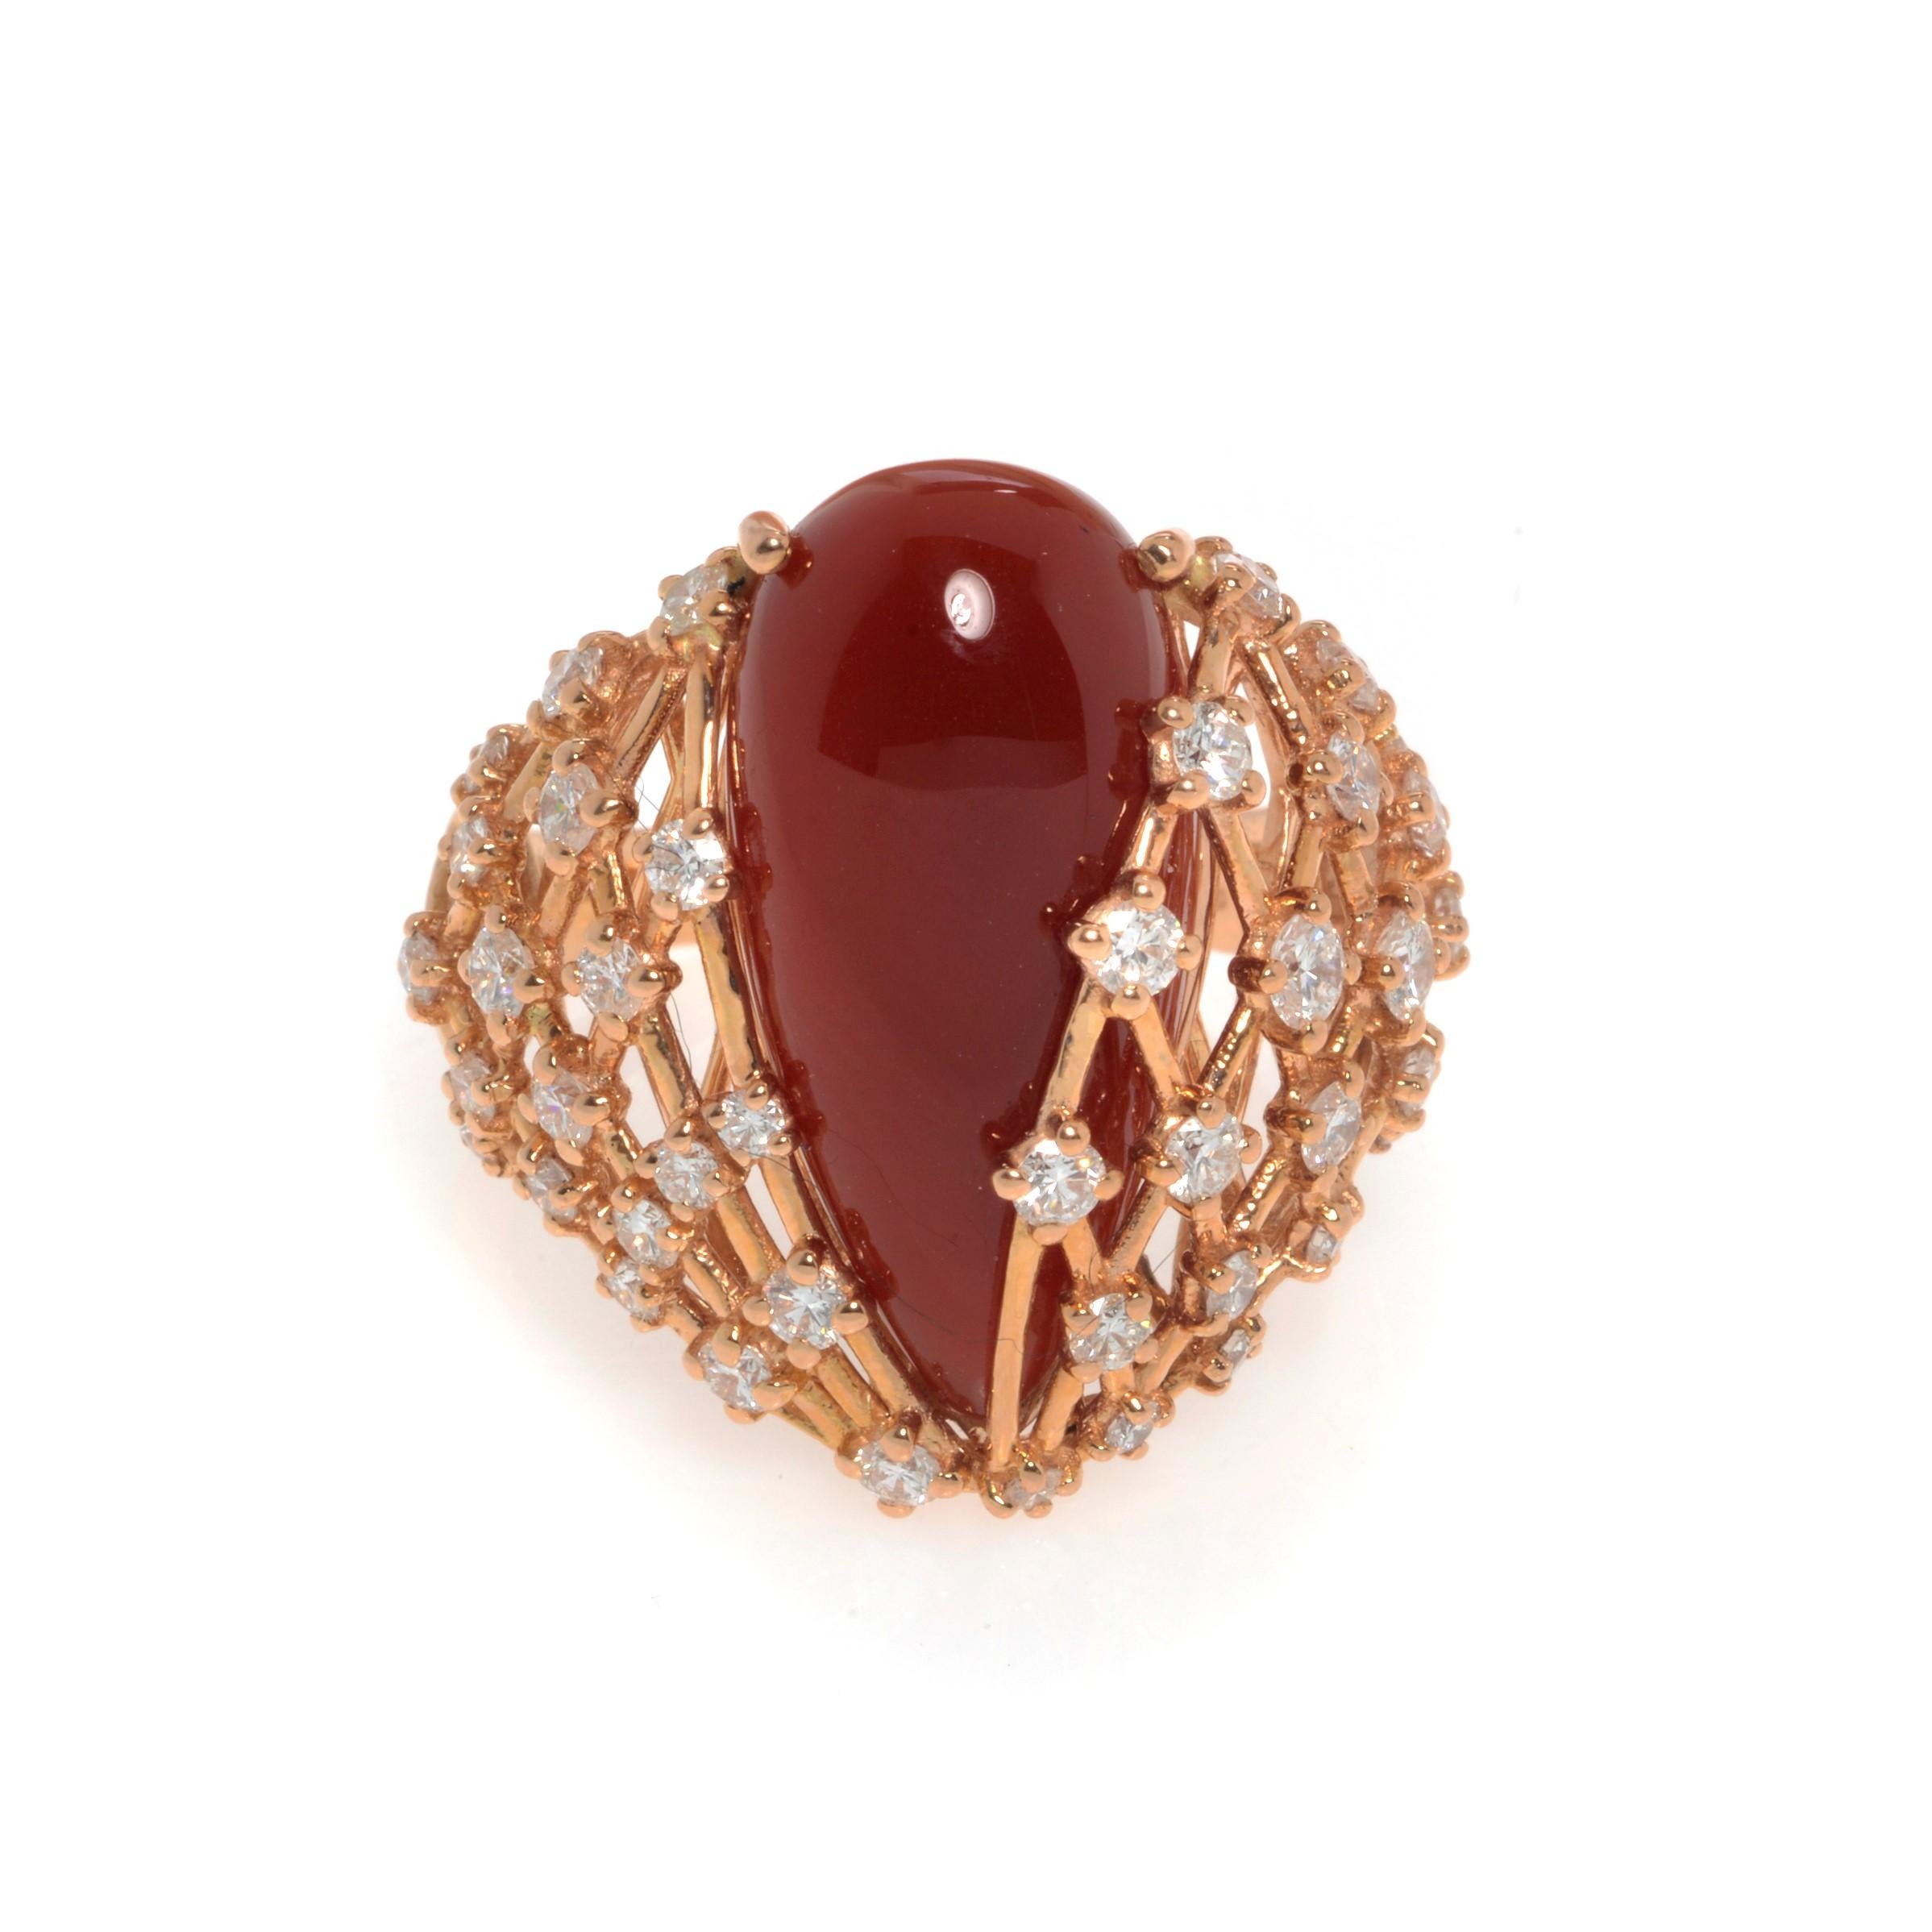 This beautiful cocktail ring features a large natural pear shape red Agate gemstone in 18k rose gold setting. Set with 1.22cttw of brilliant cut diamonds. Diamond color G and VVS clarity. Red Agate weights 1.80 grams. Ring size 7.75. Top